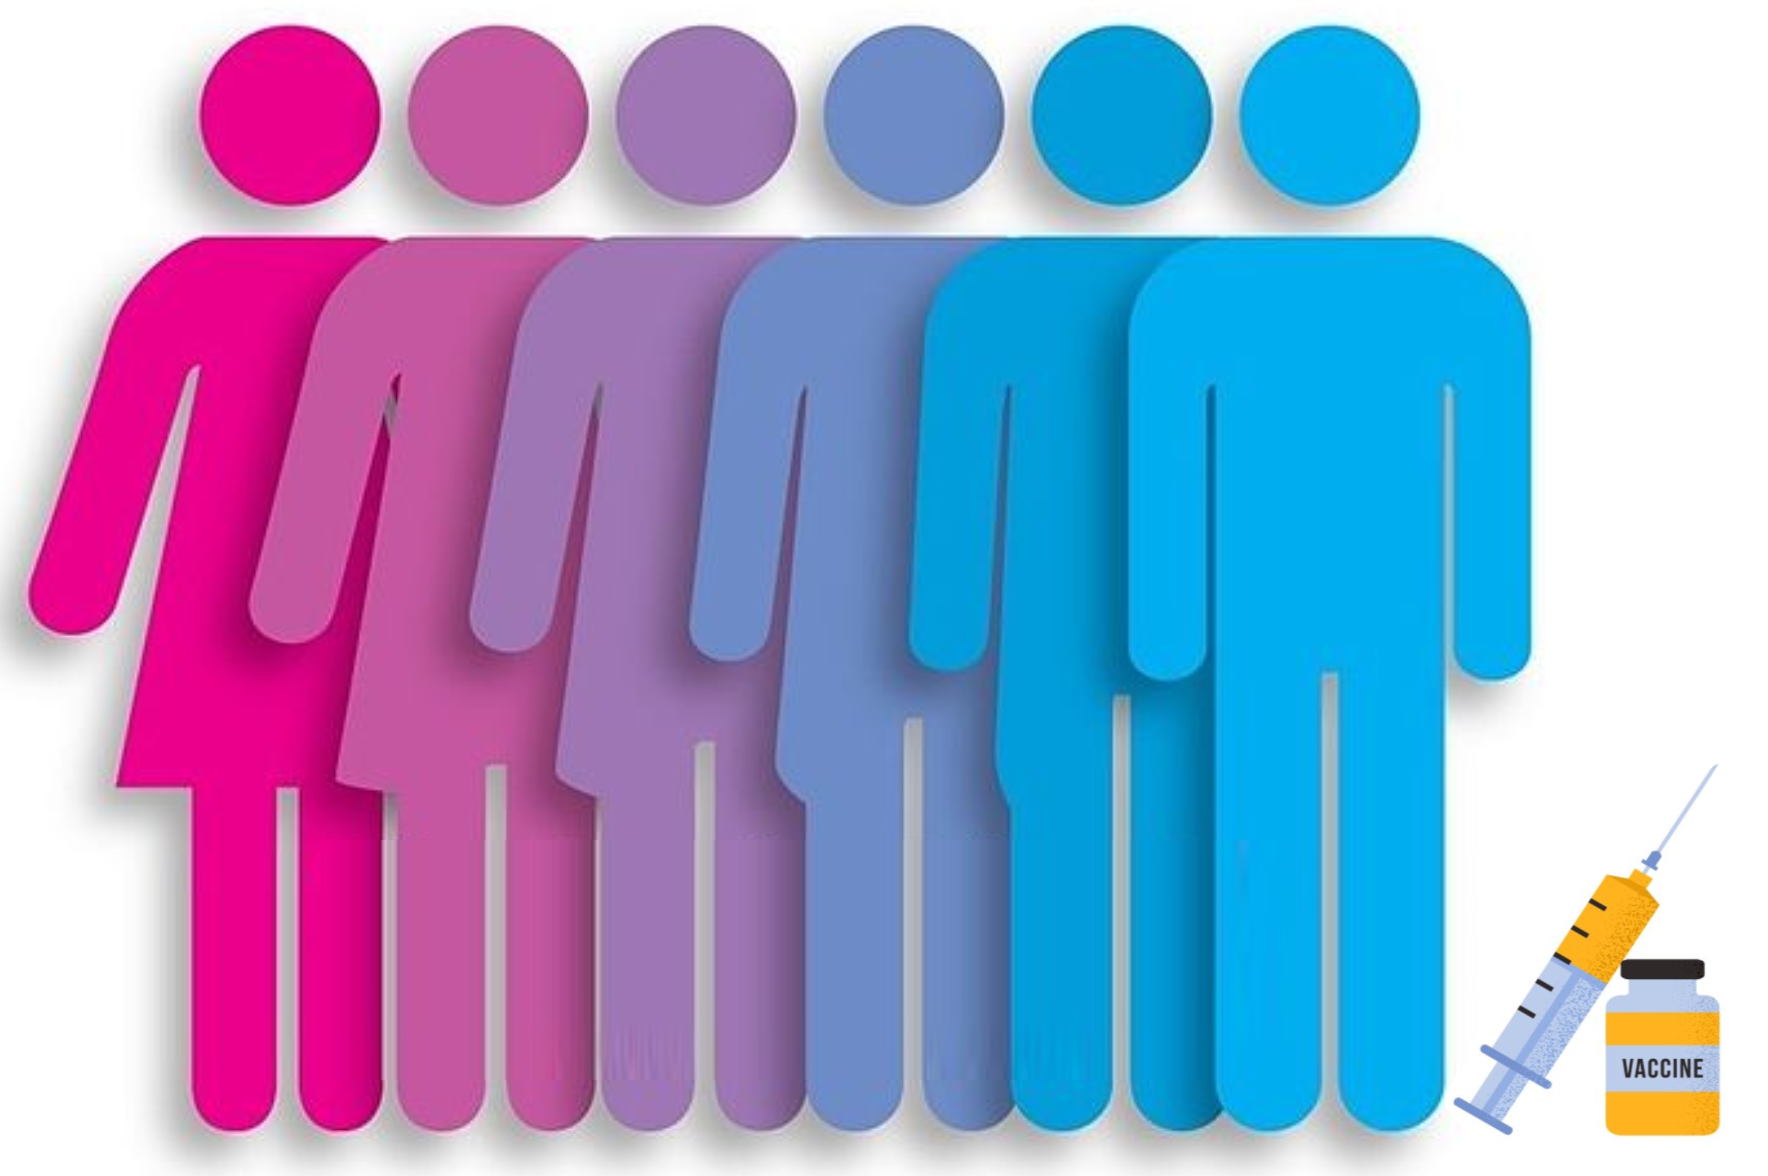 Survey Suggests There Could Be Link Between Vaccination And Gender Dysphoria